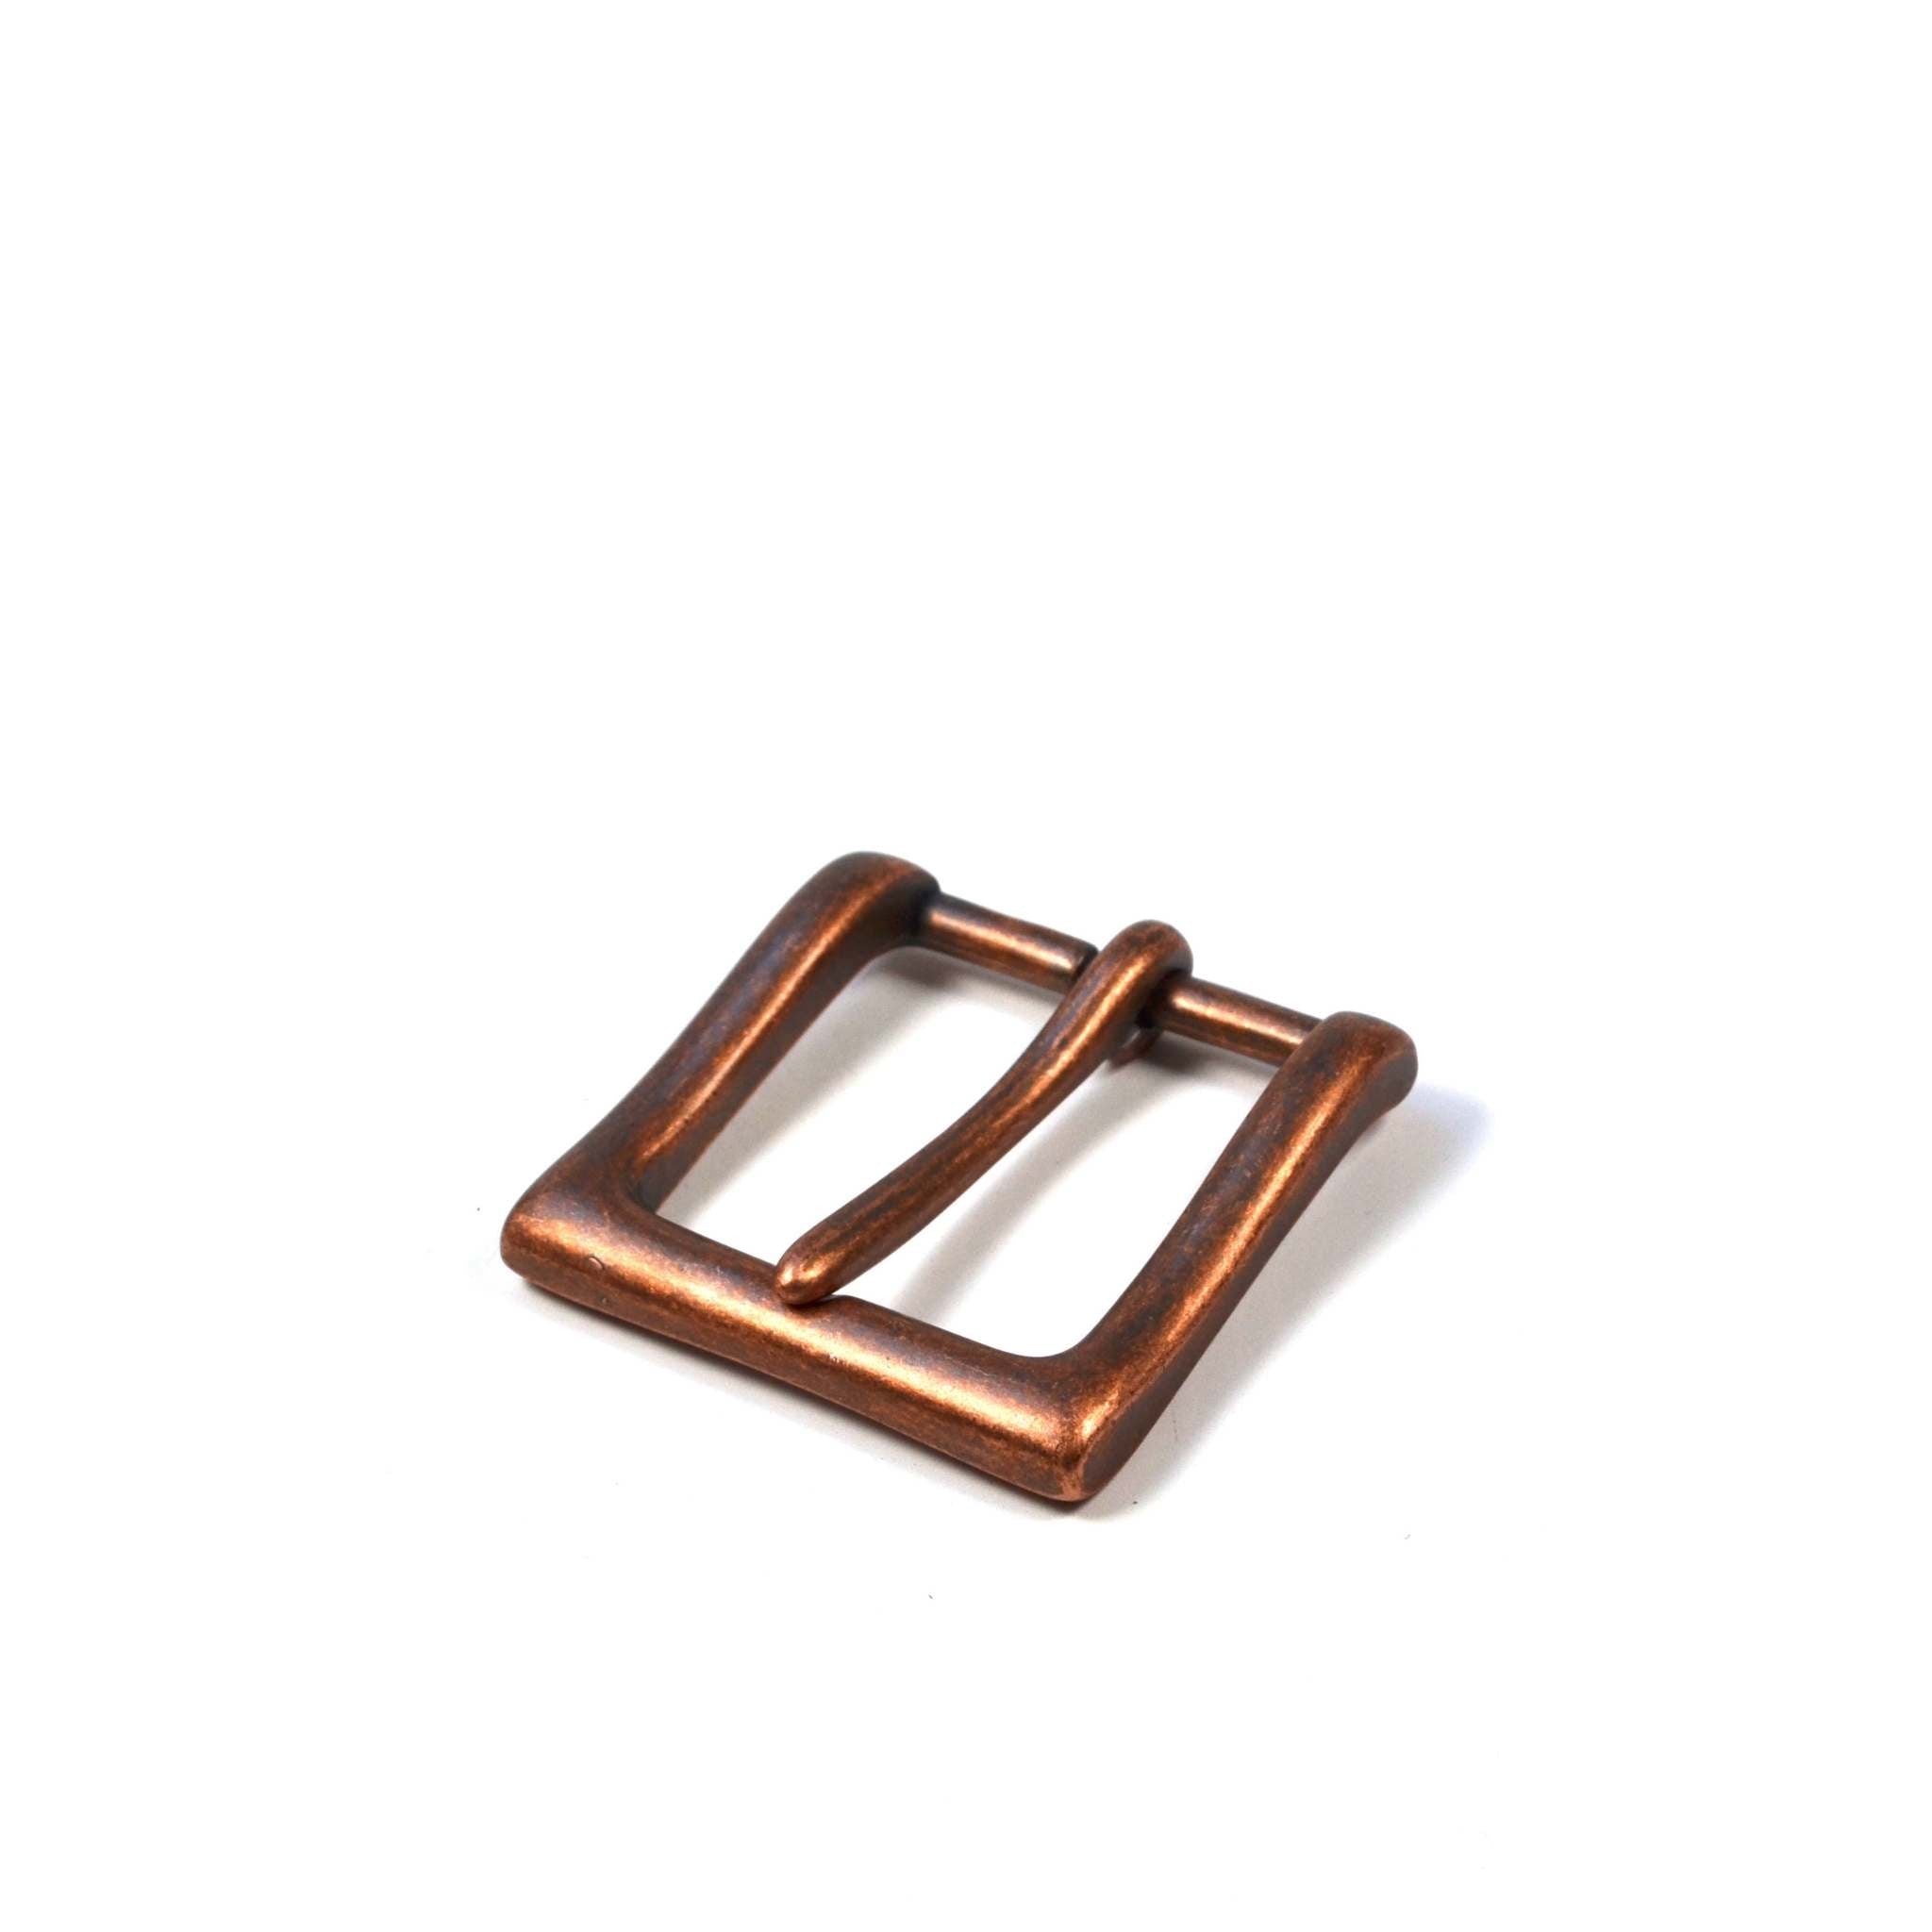 Aged copper effect belt or strap buckle for leathercraft